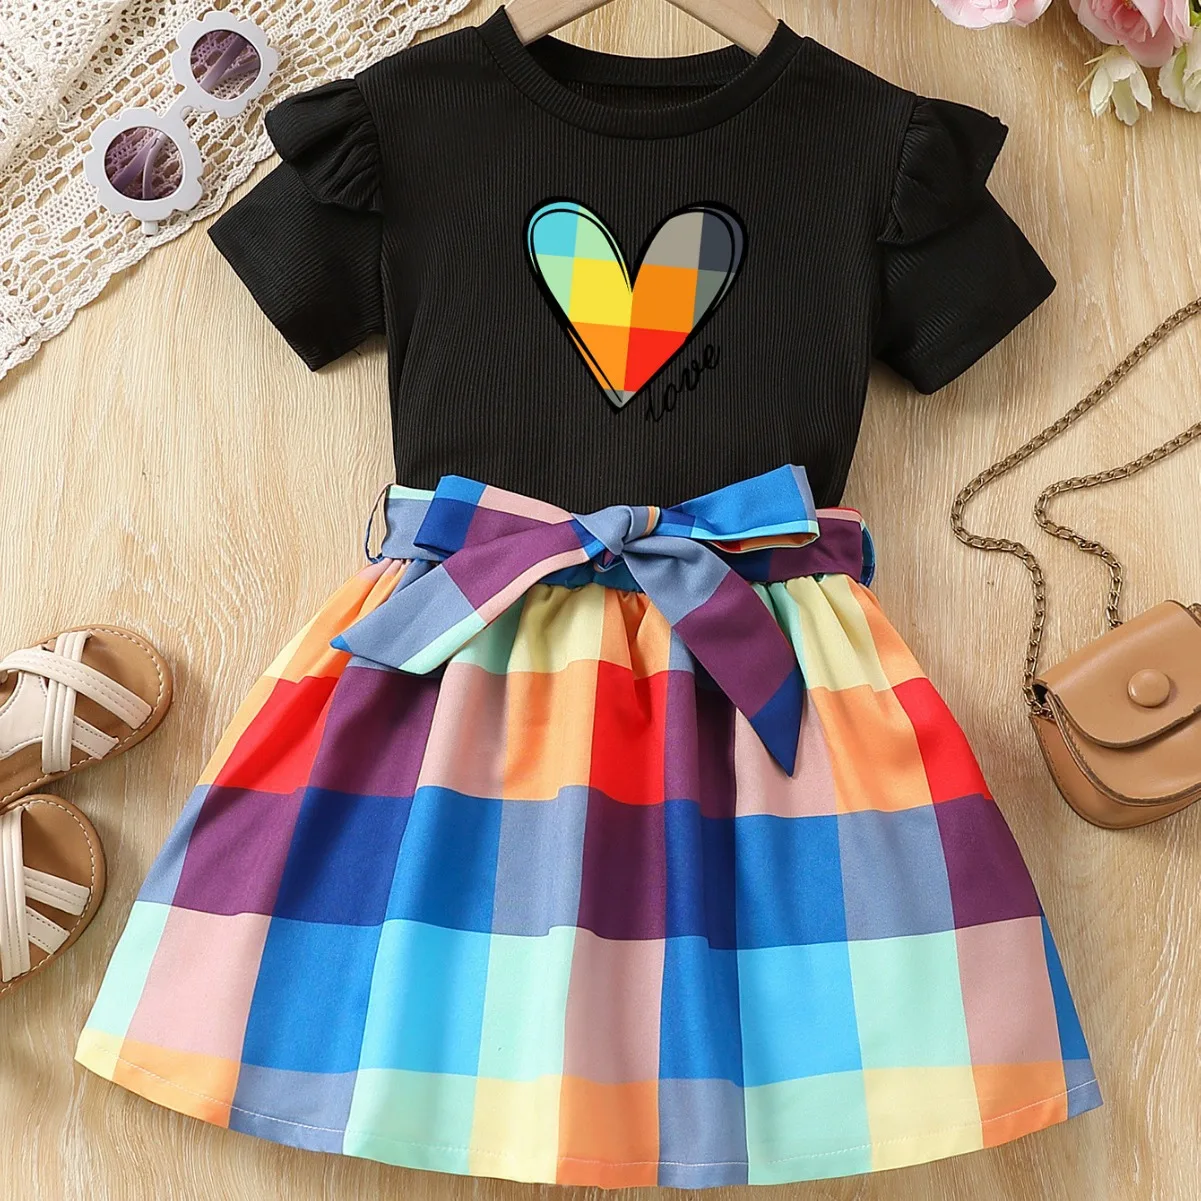 2024 Summer Kids Clothes Sets Girls Casual Cute Heart Print Short Sleeve T-shirt Top + Plaid Skirt Children's Two-piece Clothing girls clothing sets summer kids short sleeve t shirt